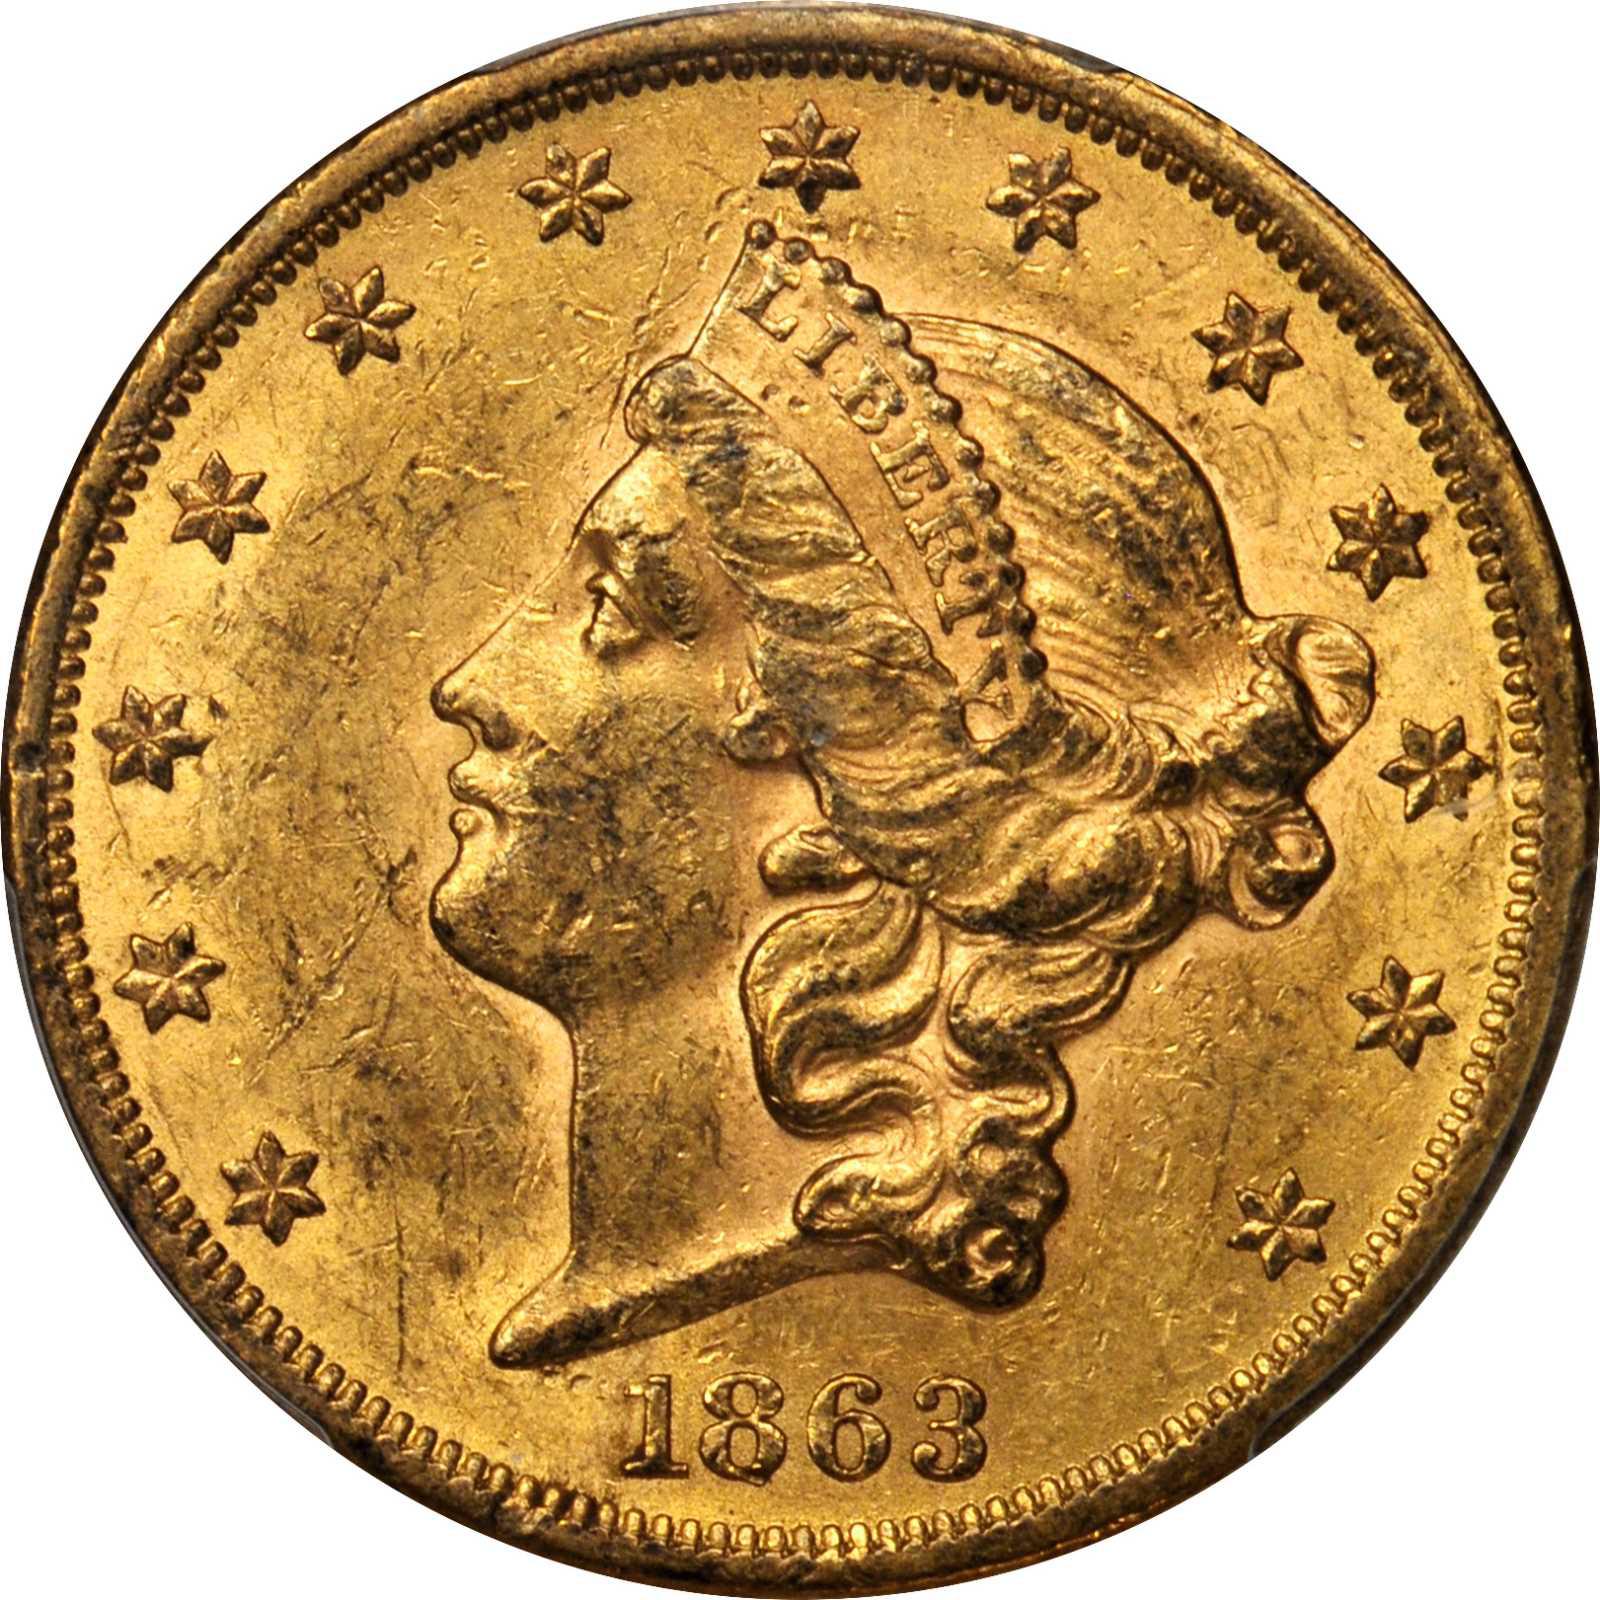 value-of-1863-20-liberty-double-eagle-sell-rare-coins